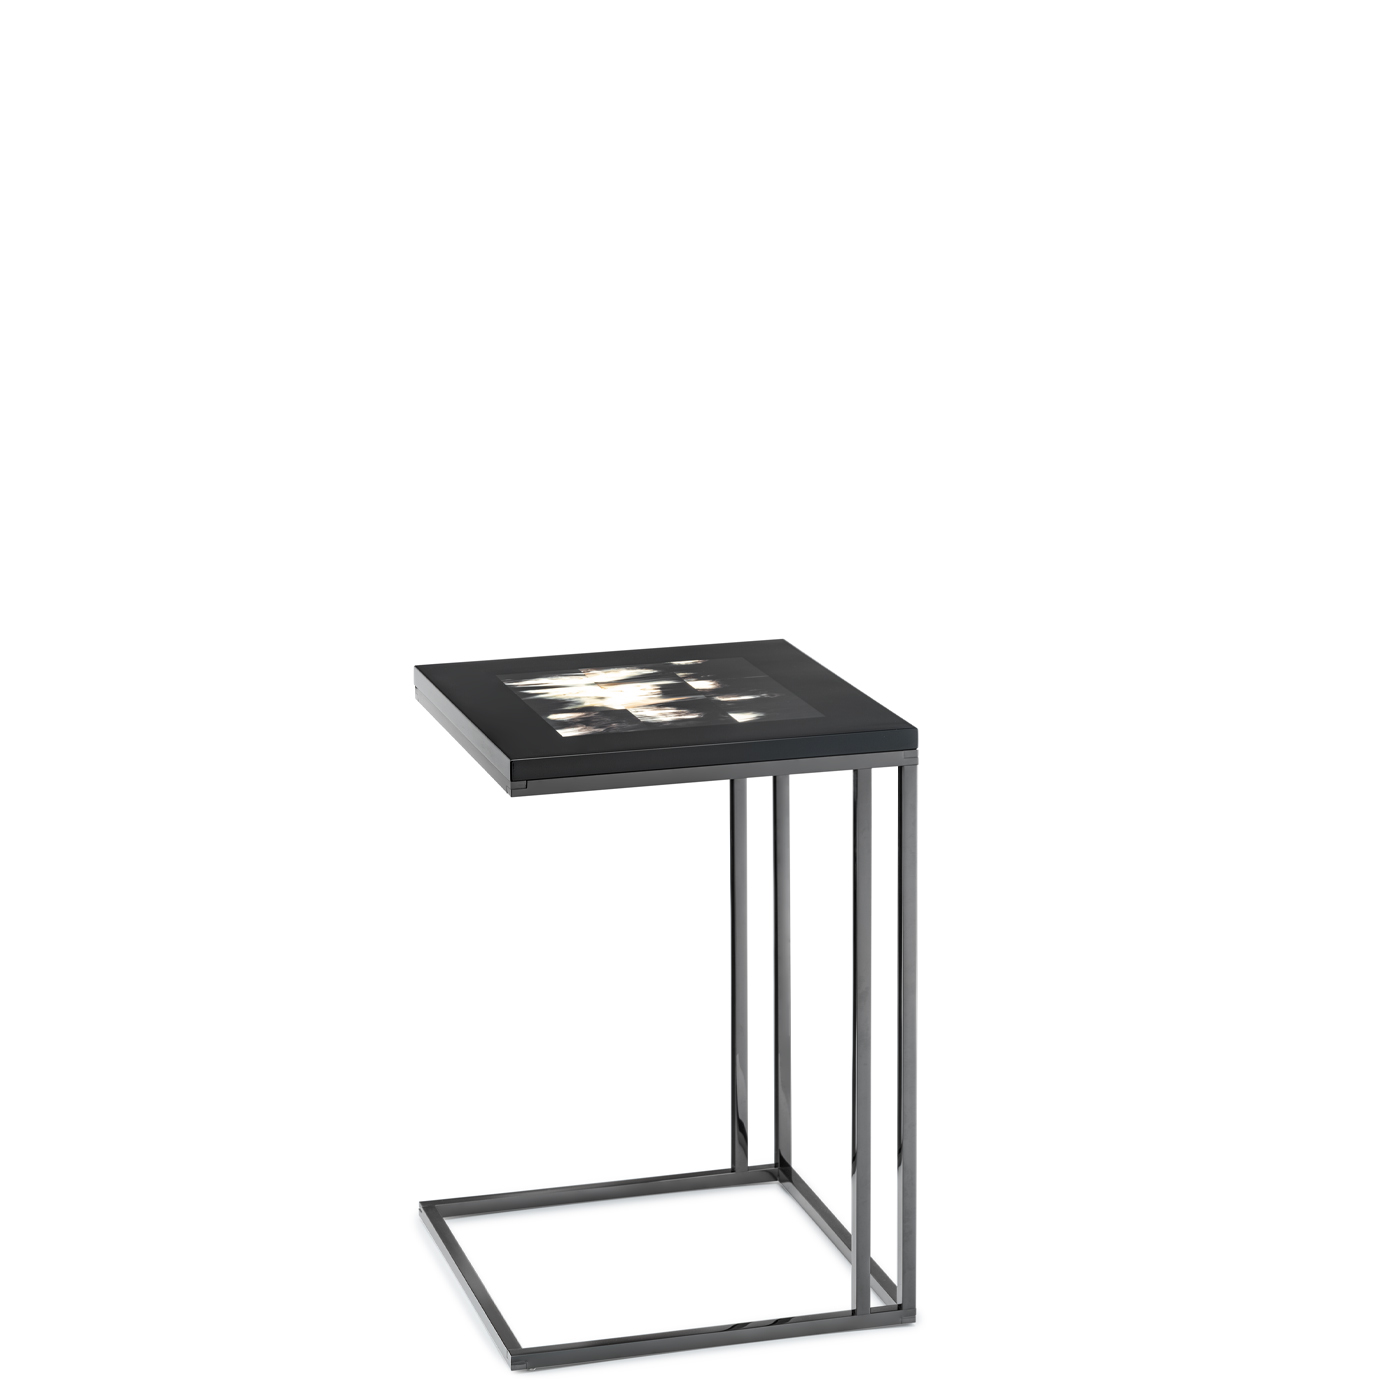 Tables and console tables - Eric end table in horn, glossy black lacquered wood and gunmetal stainless steel - side view -Arcahorn